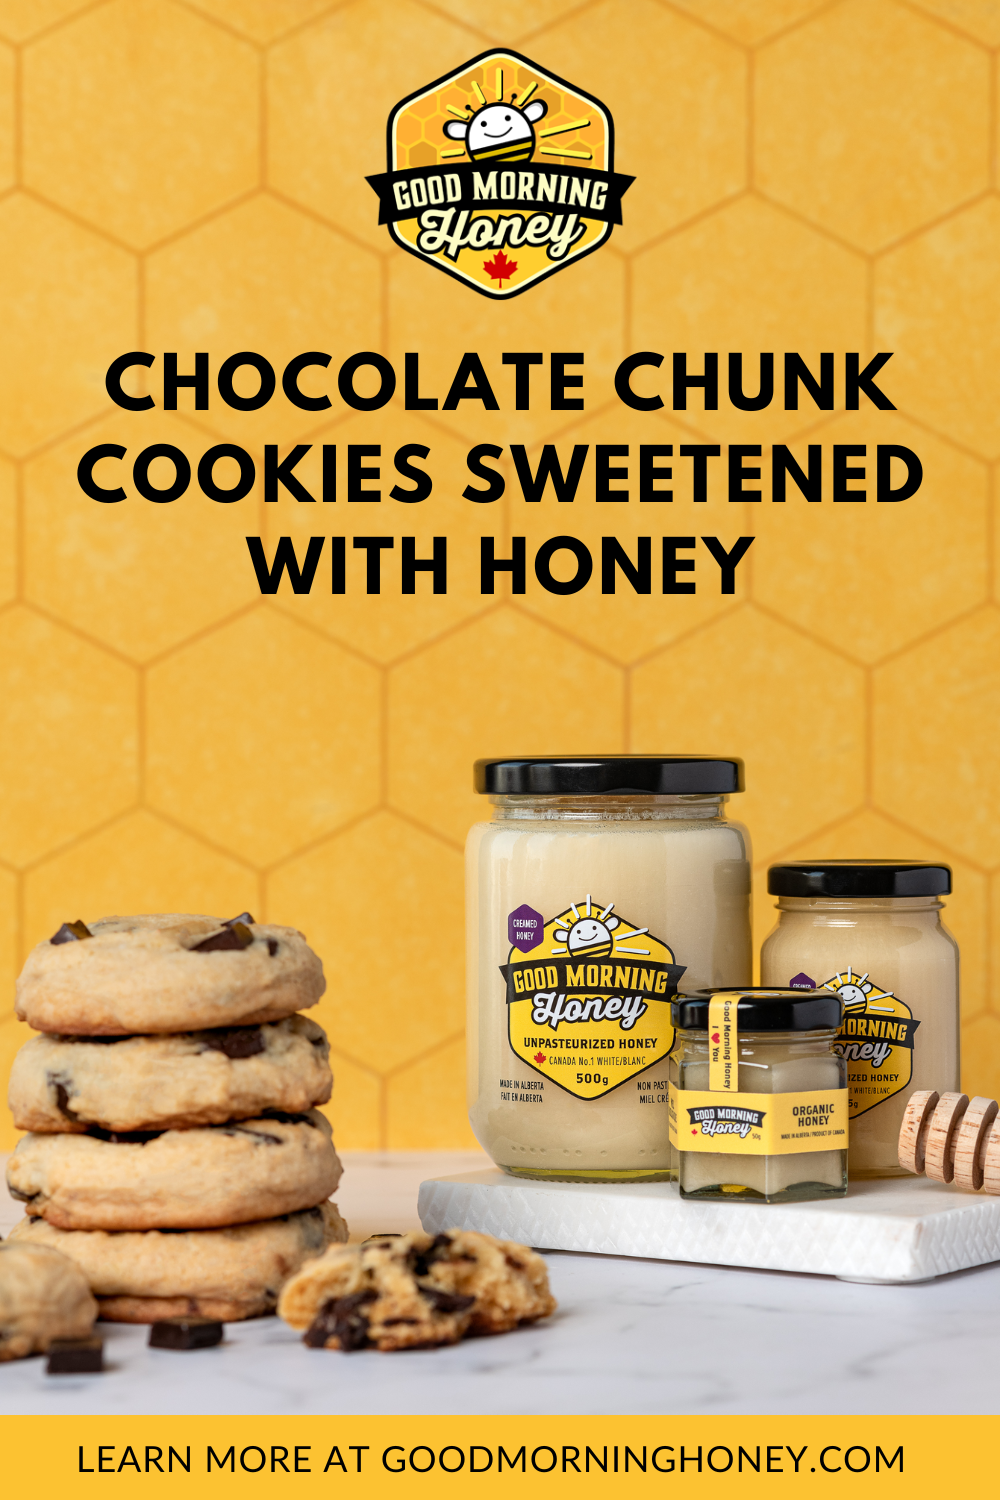 Chocolate chunk cookies made with delicious creamed Good Morning Honey.